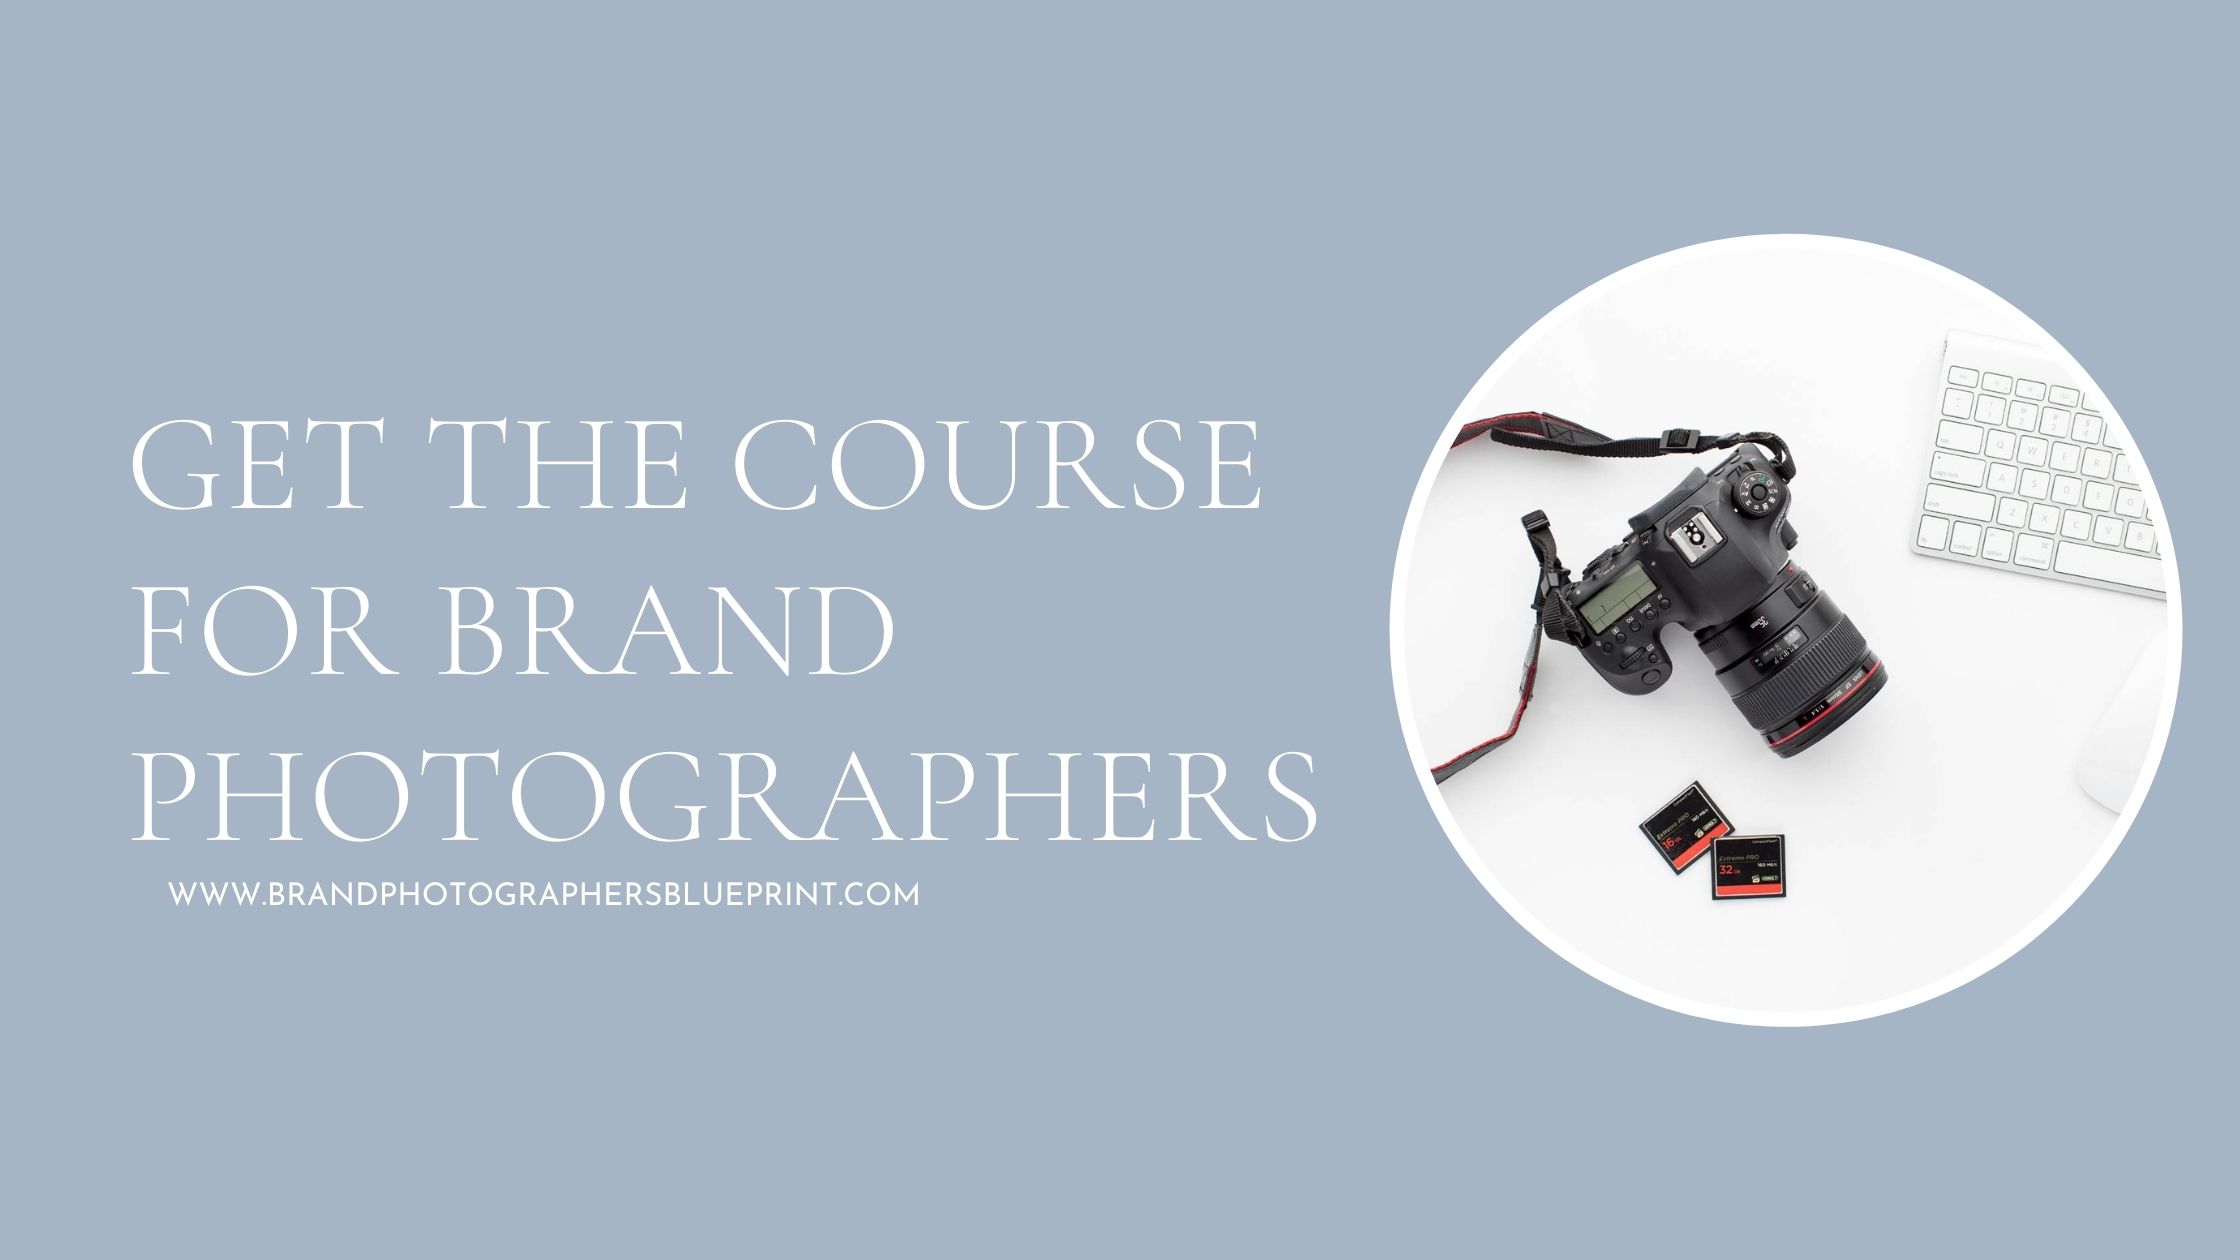 graphic saying get the course for brand photographers www.brandphotographersblueprint.com and an image of a camera, camera cards, and keyboard